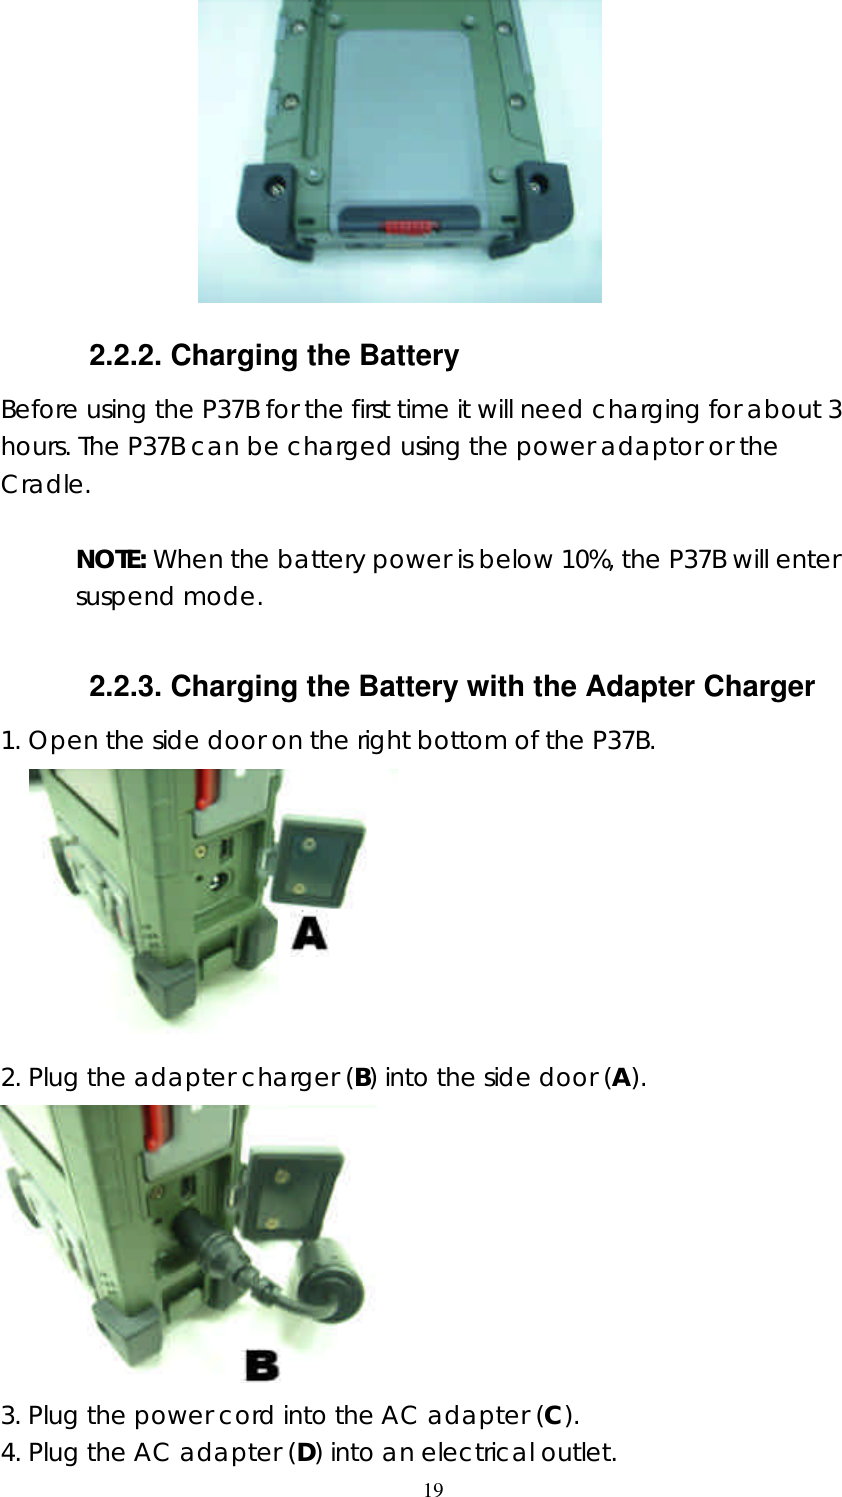  19                     2.2.2. Charging the Battery Before using the P37B for the first time it will need charging for about 3 hours. The P37B can be charged using the power adaptor or the Cradle.   NOTE: When the battery power is below 10%, the P37B will enter suspend mode.  2.2.3. Charging the Battery with the Adapter Charger 1. Open the side door on the right bottom of the P37B.                     2. Plug the adapter charger (B) into the side door (A).  3. Plug the power cord into the AC adapter (C).   4. Plug the AC adapter (D) into an electrical outlet.   